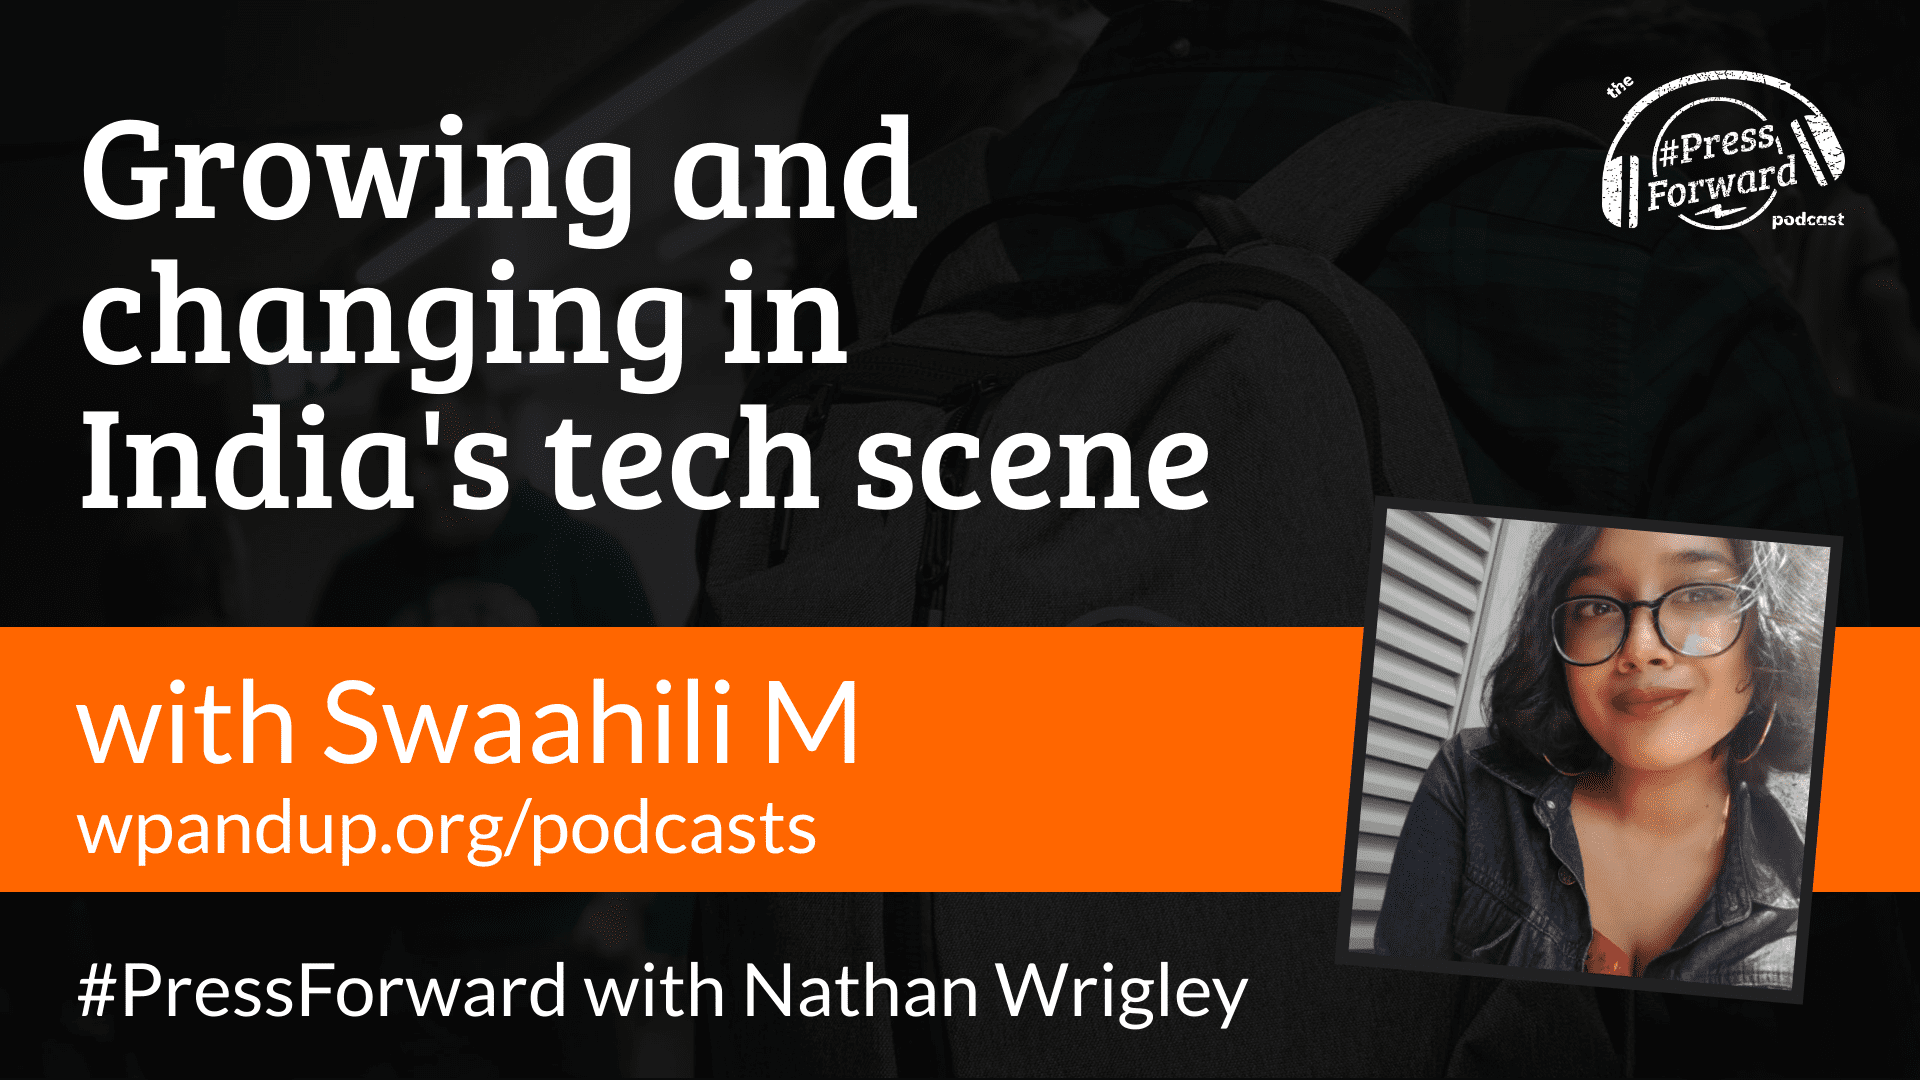 Growing and changing in India's tech scene - #044